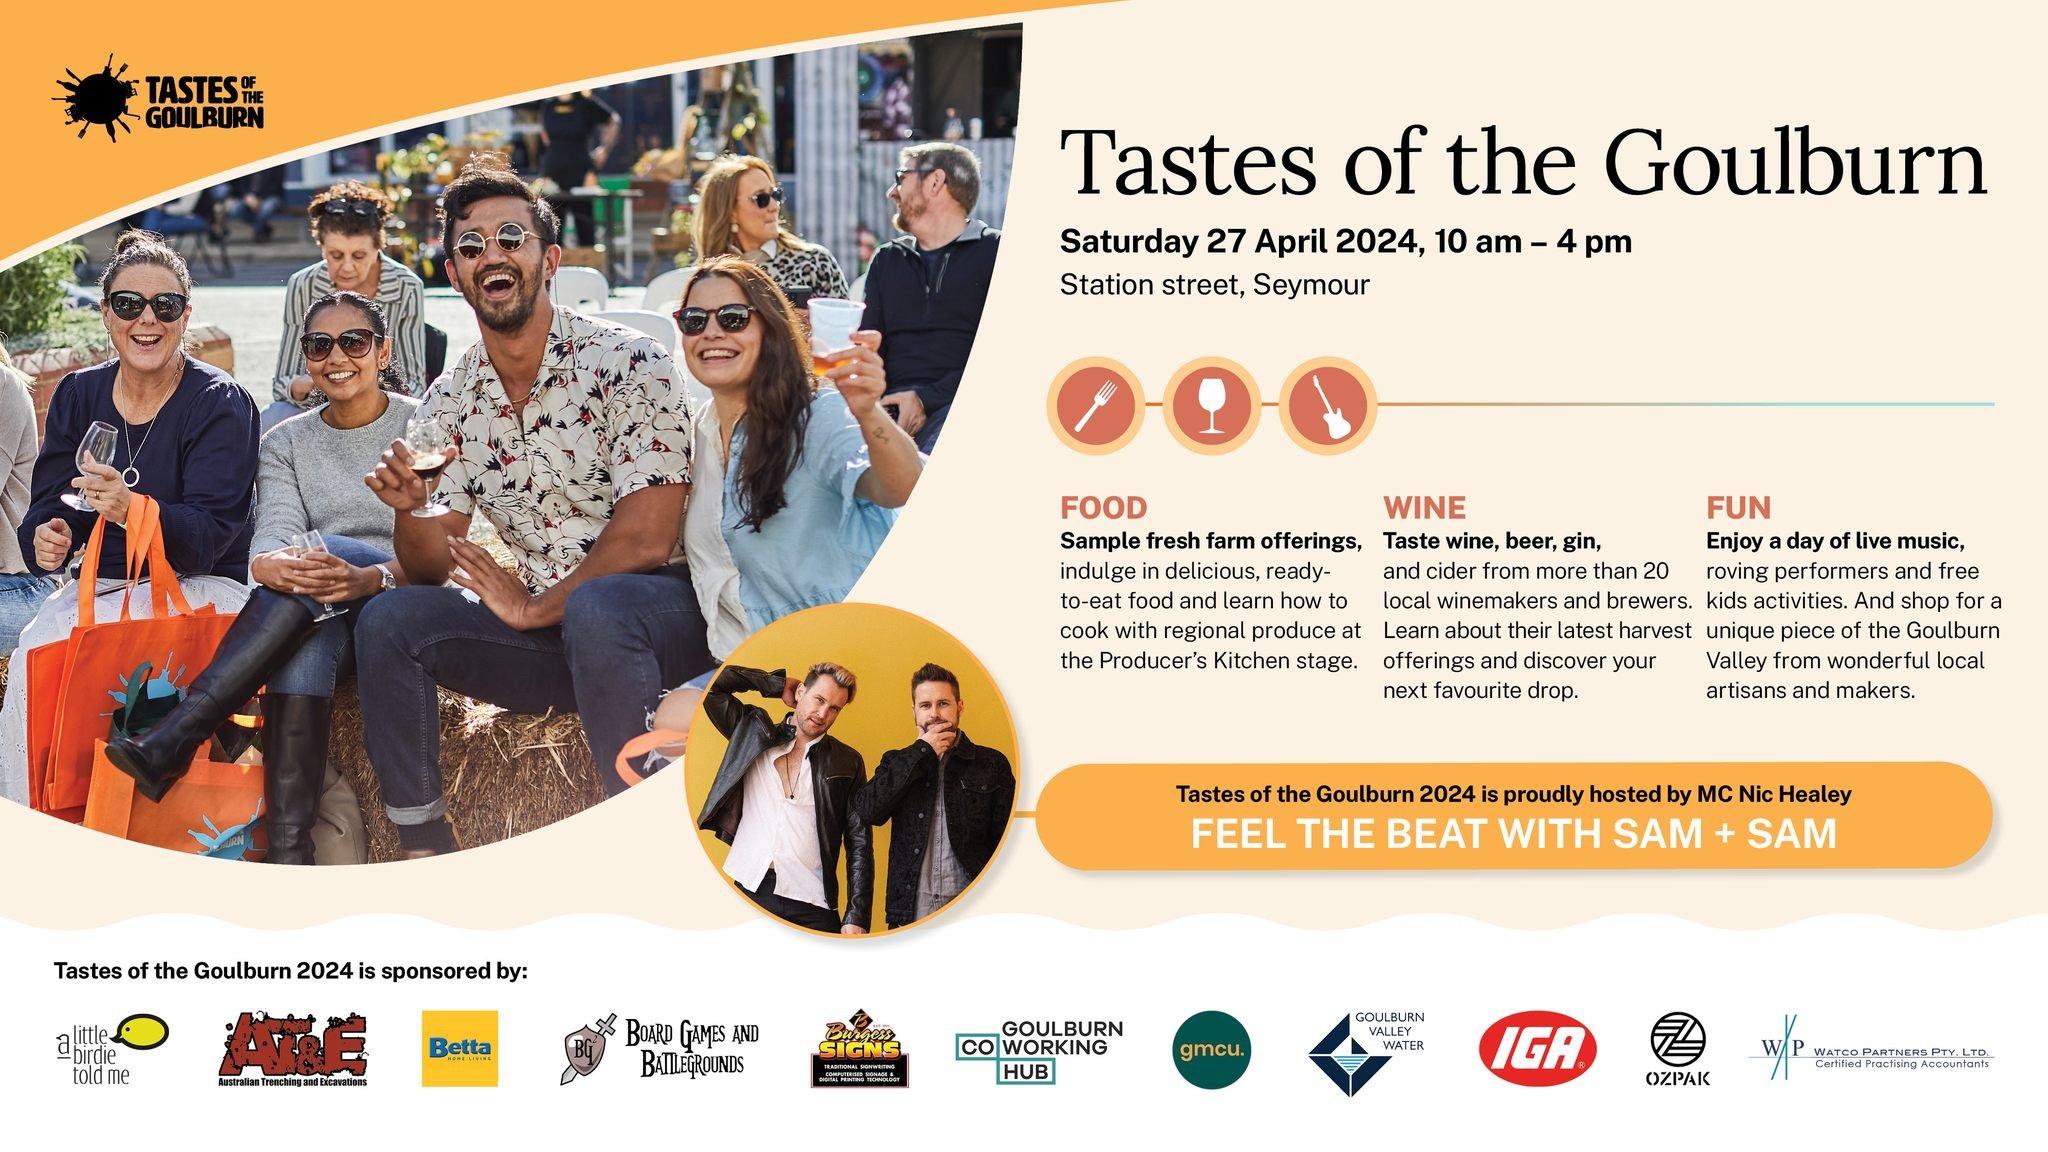 Plan your visit to Tastes of the Goulburn 🍷🍕🍇

Stay, play and explore. Enjoy a day of food, wine and fun at Tastes of the Goulburn and stay on to explore more of the beautiful Goulburn Valley region.

Download our Official Event Program now! 👉 ht